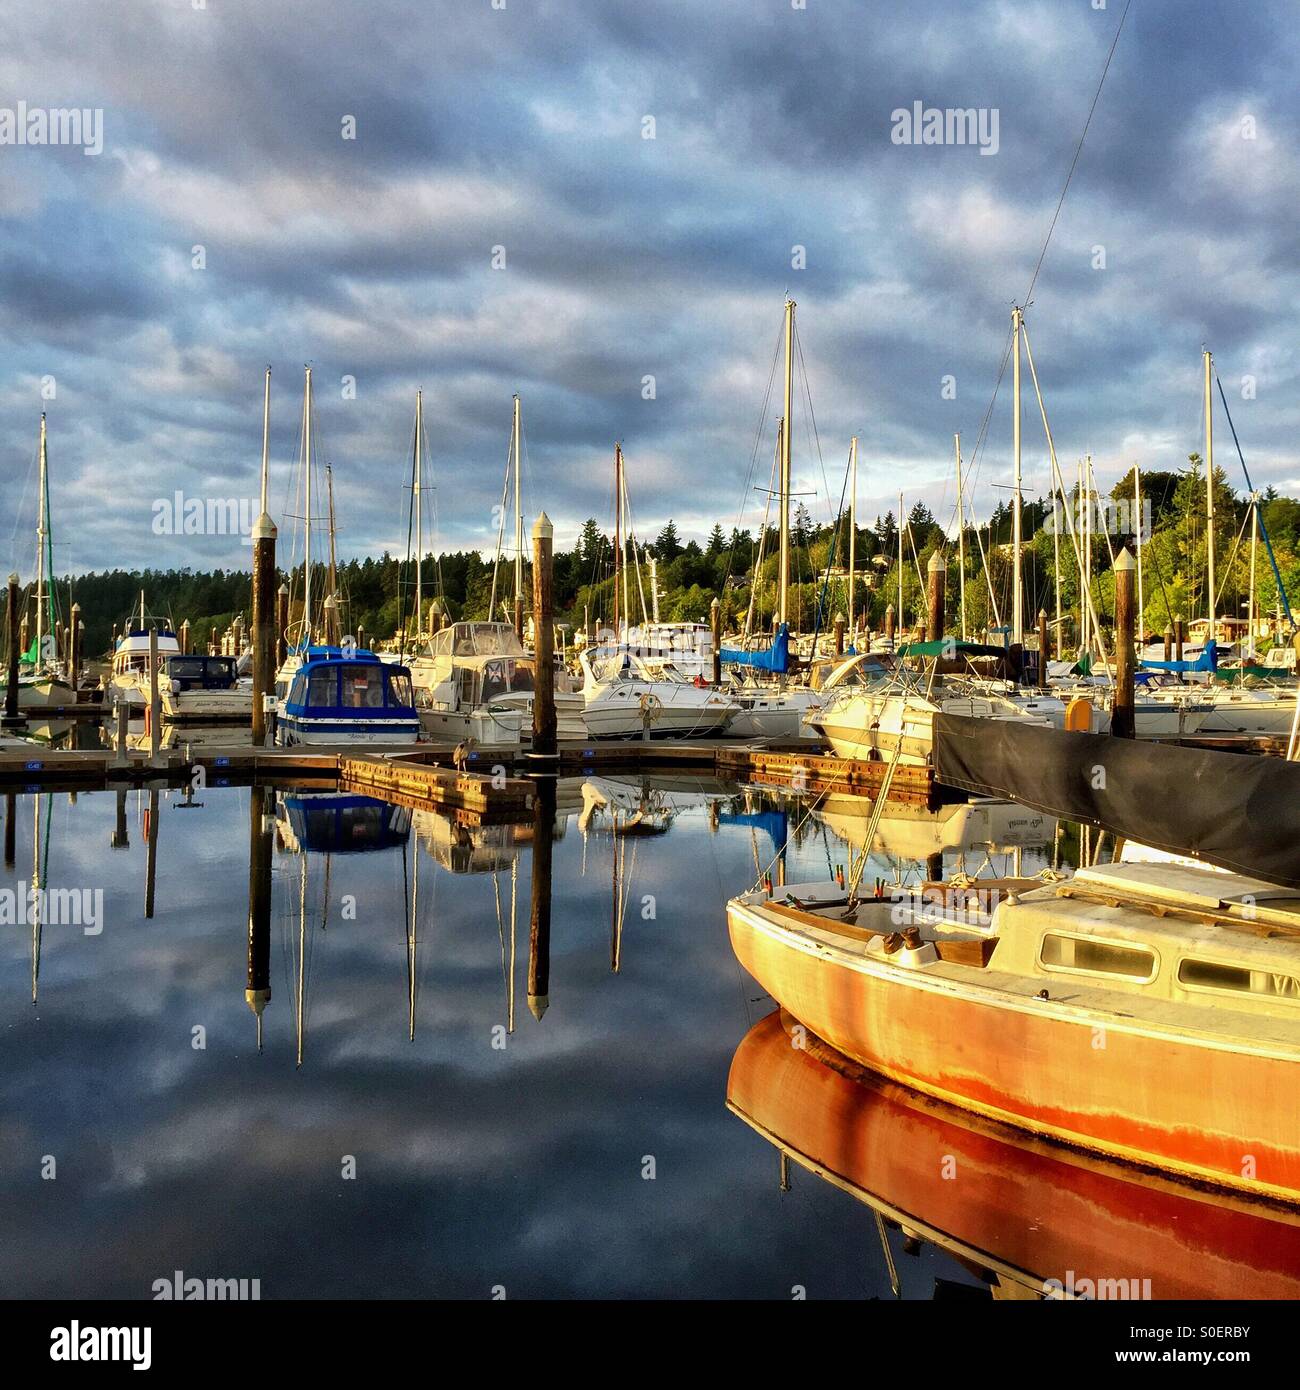 Late afternoon golden light adds beauty to a Pacific Northwest Marina. Stock Photo